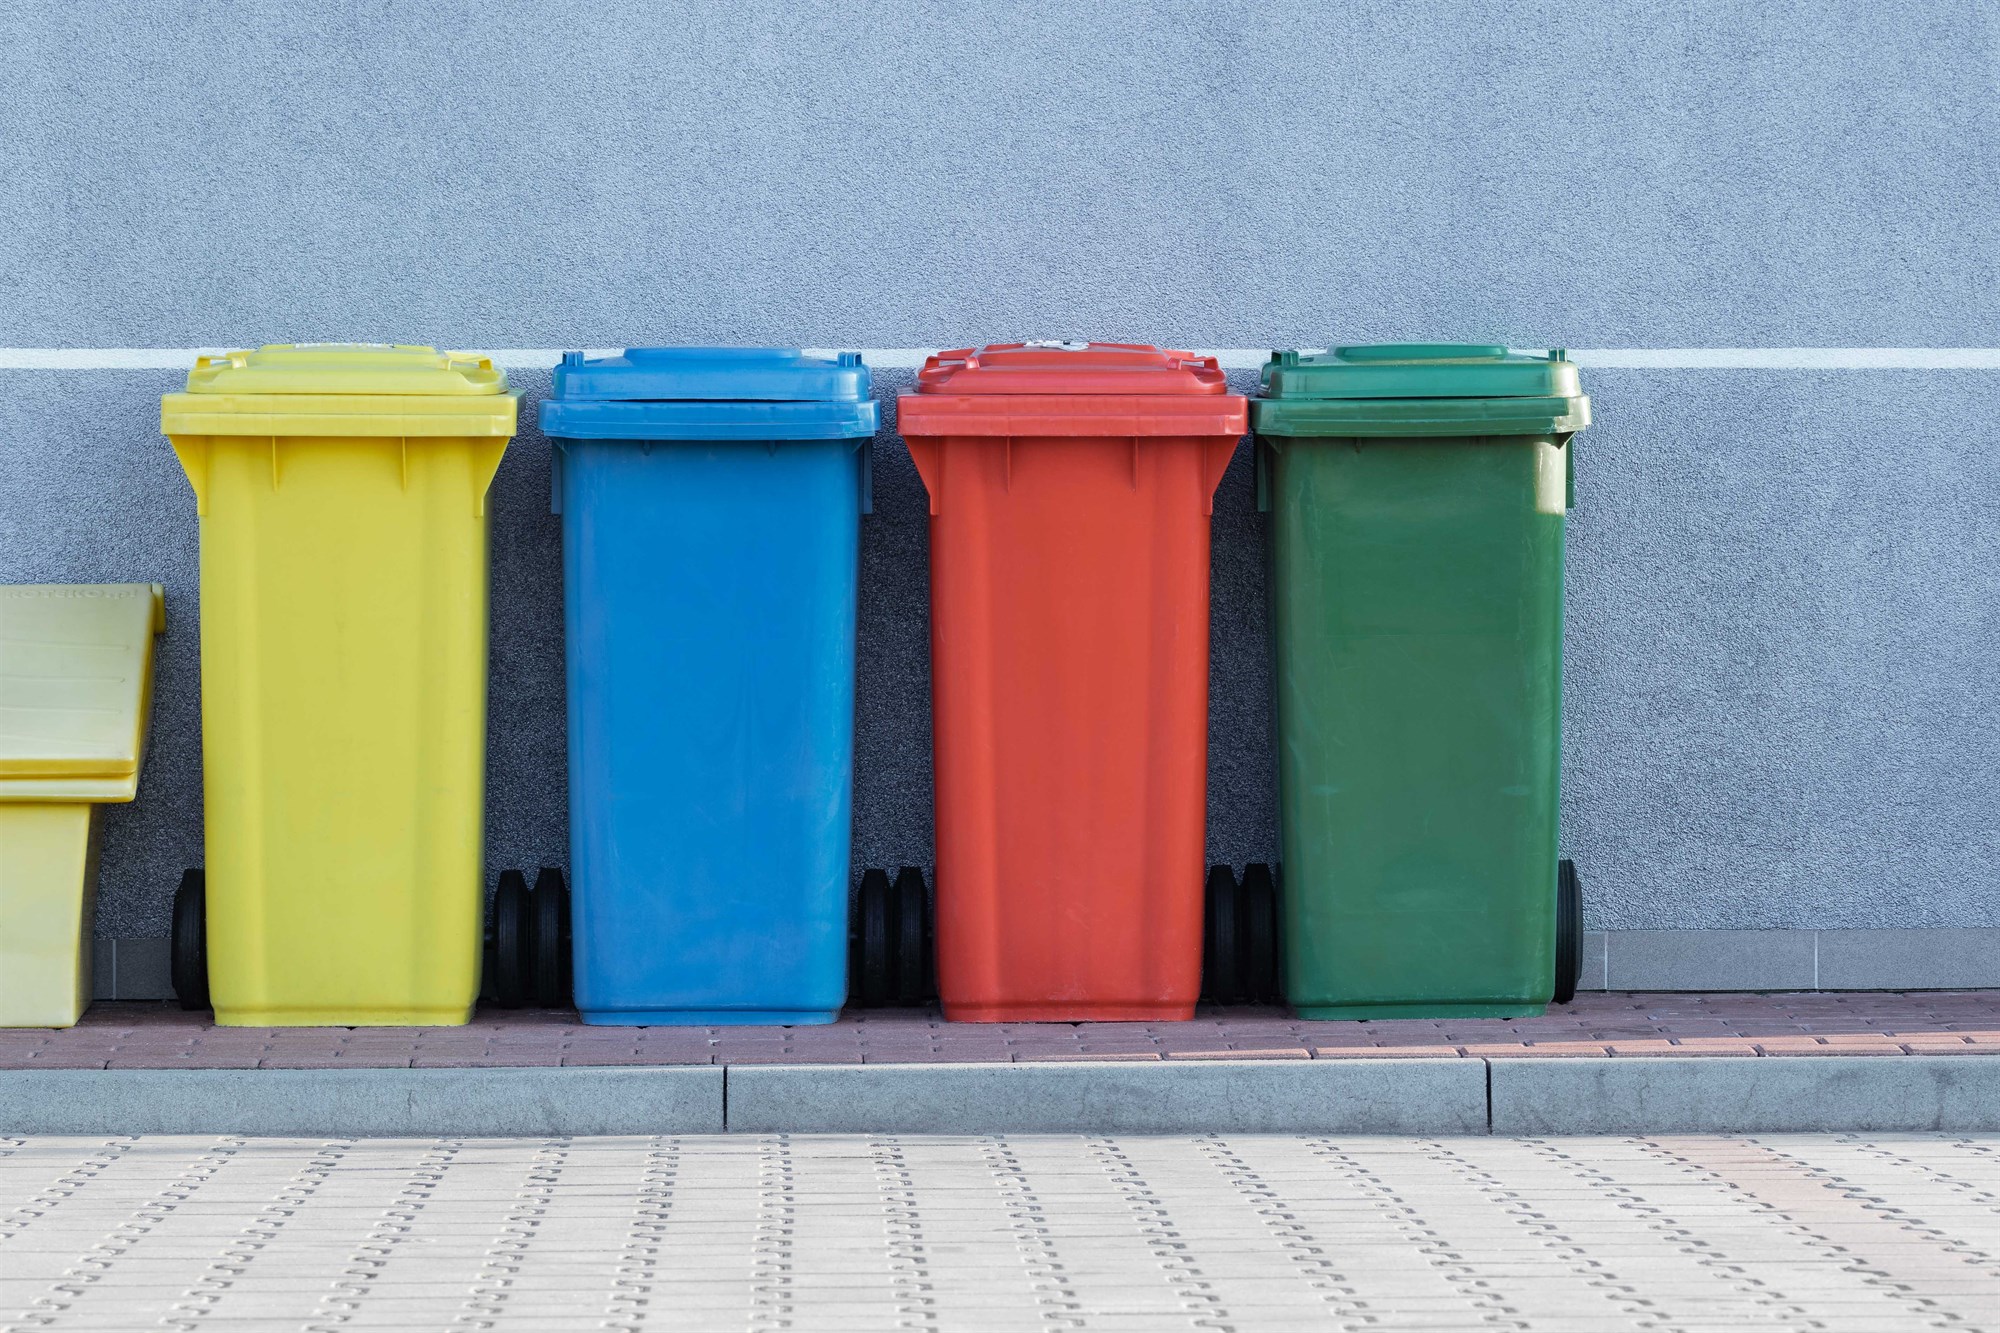 A row of colourful recycling bins.